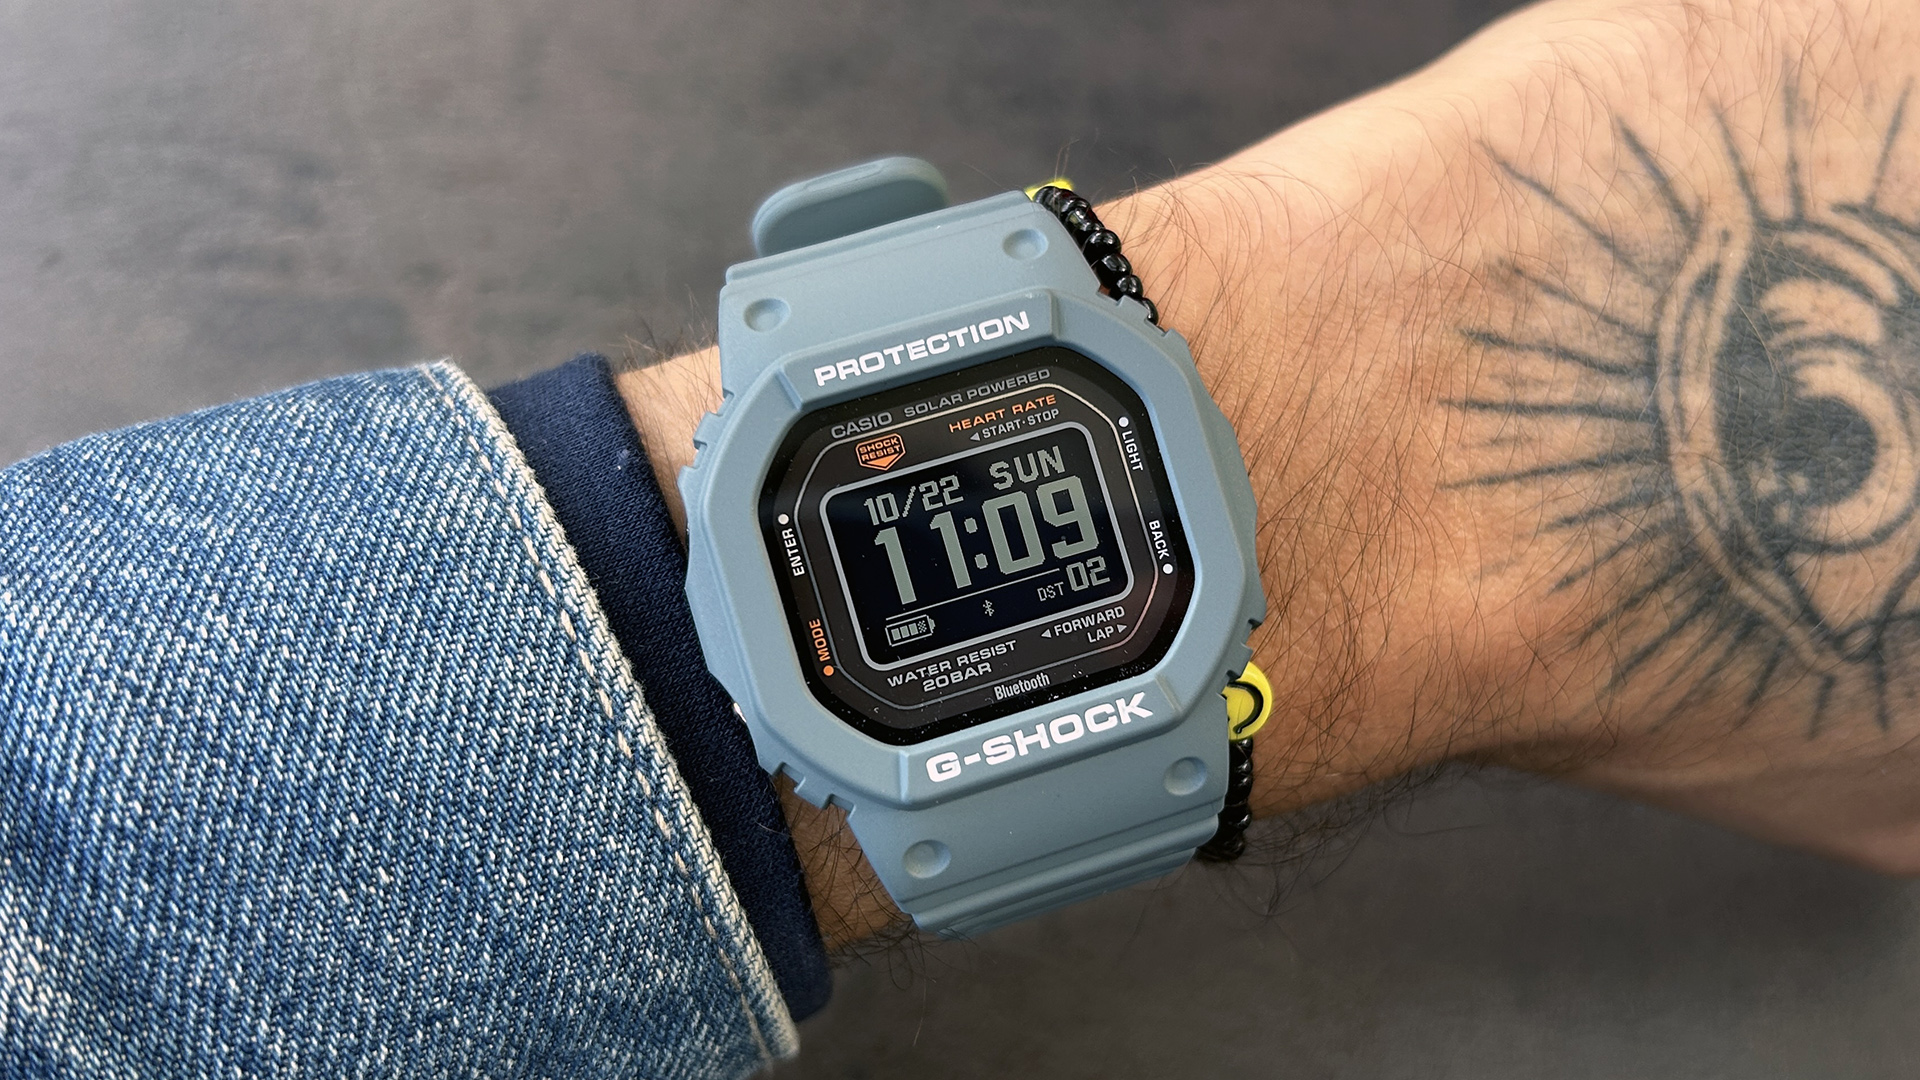 Casio G-Shock DW-H5600 review: if you hate G-Shocks, it's great